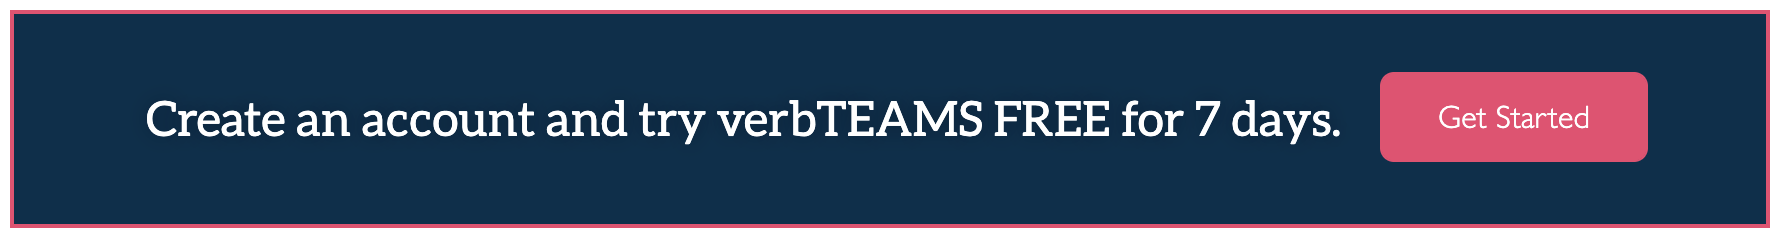 try verbTEAMS sales enablement for life sciences for free for 7 days get started today